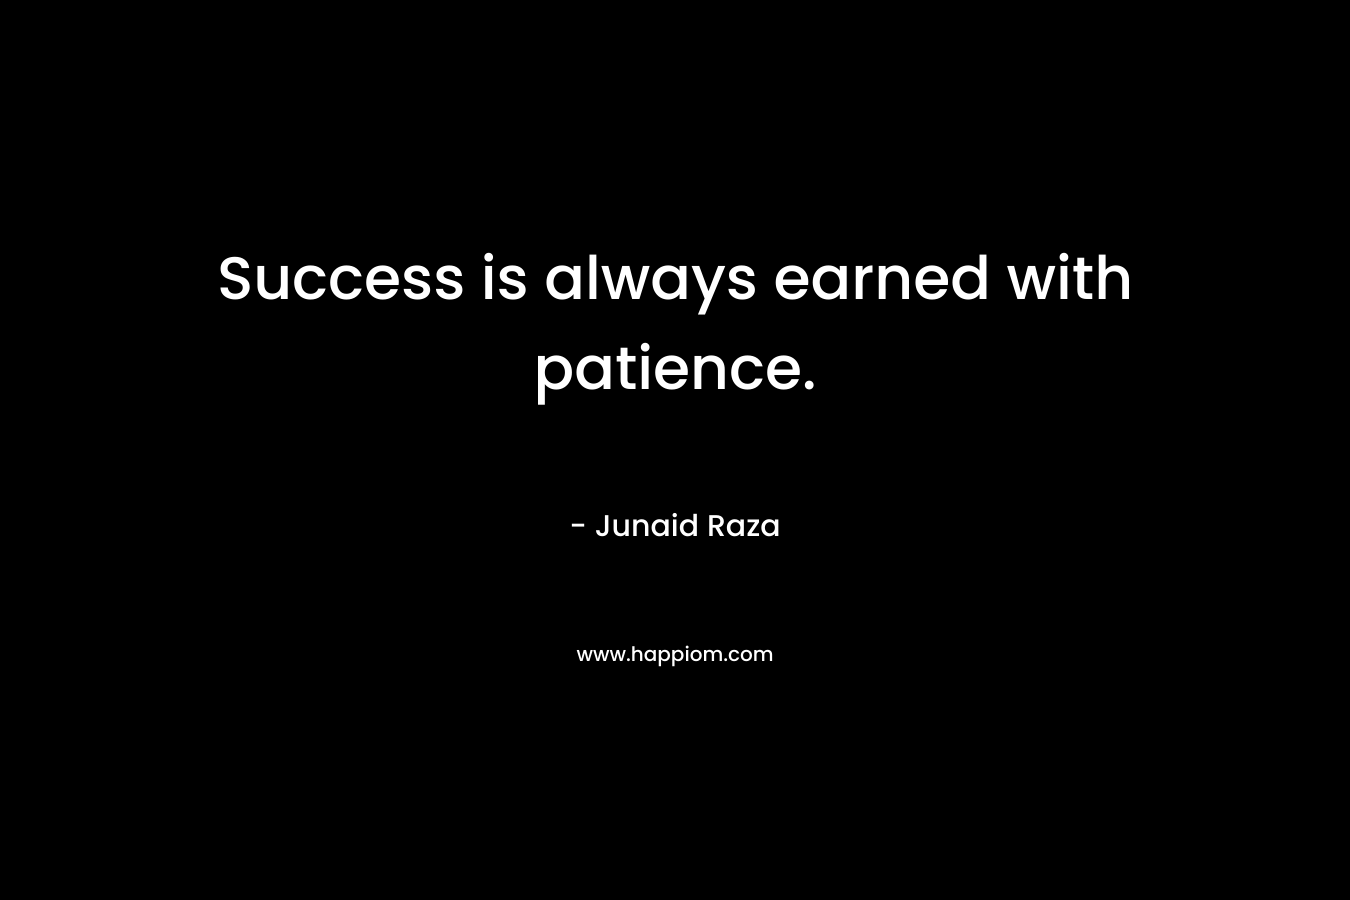 Success is always earned with patience.